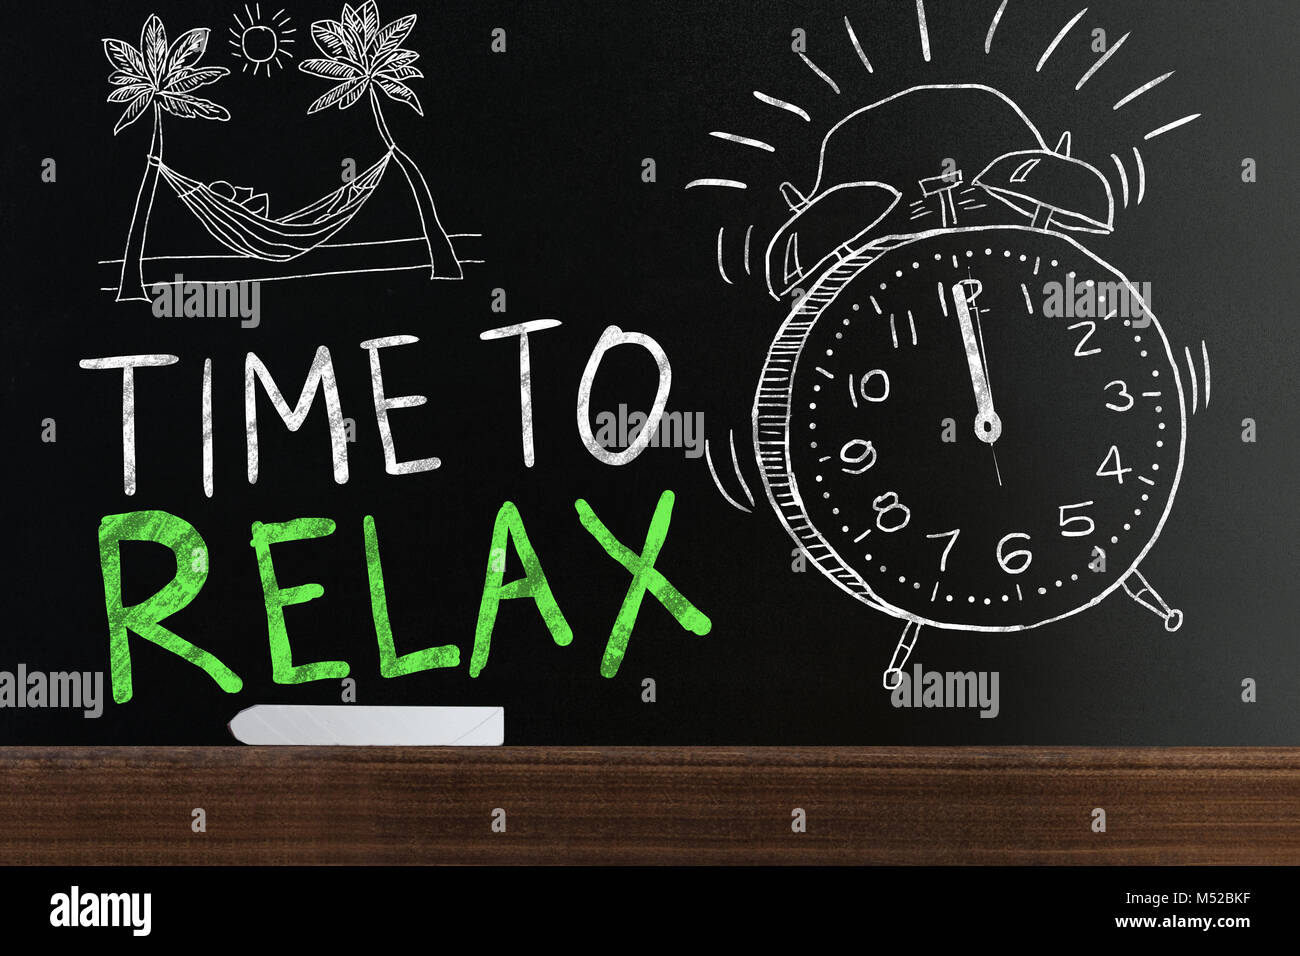 Time To Relax Words On Black Blackboard Stock Photo